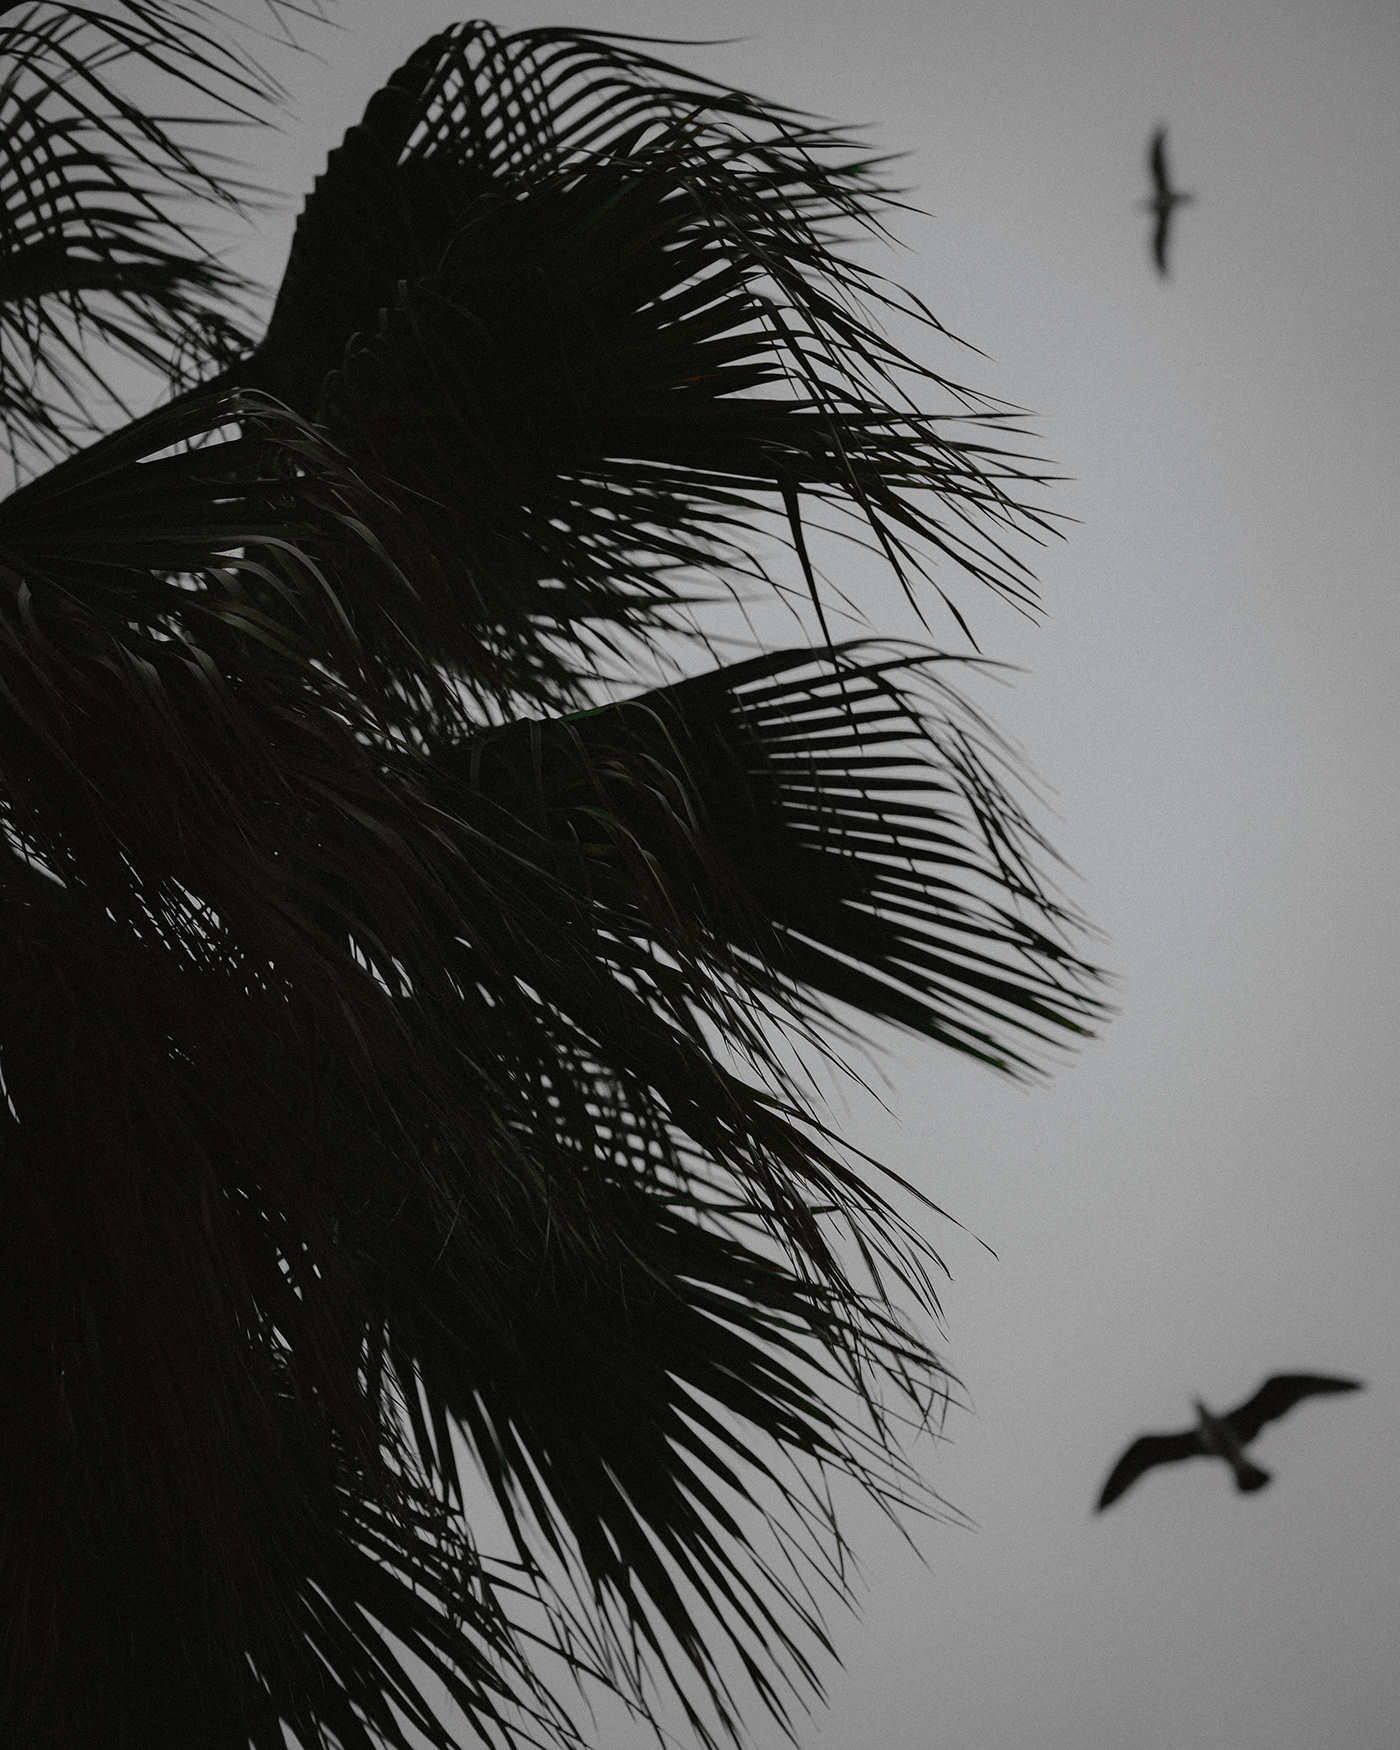 Artistic Photography bird Desaturated Landscape Nature Palm Trees seagull SKY street photography